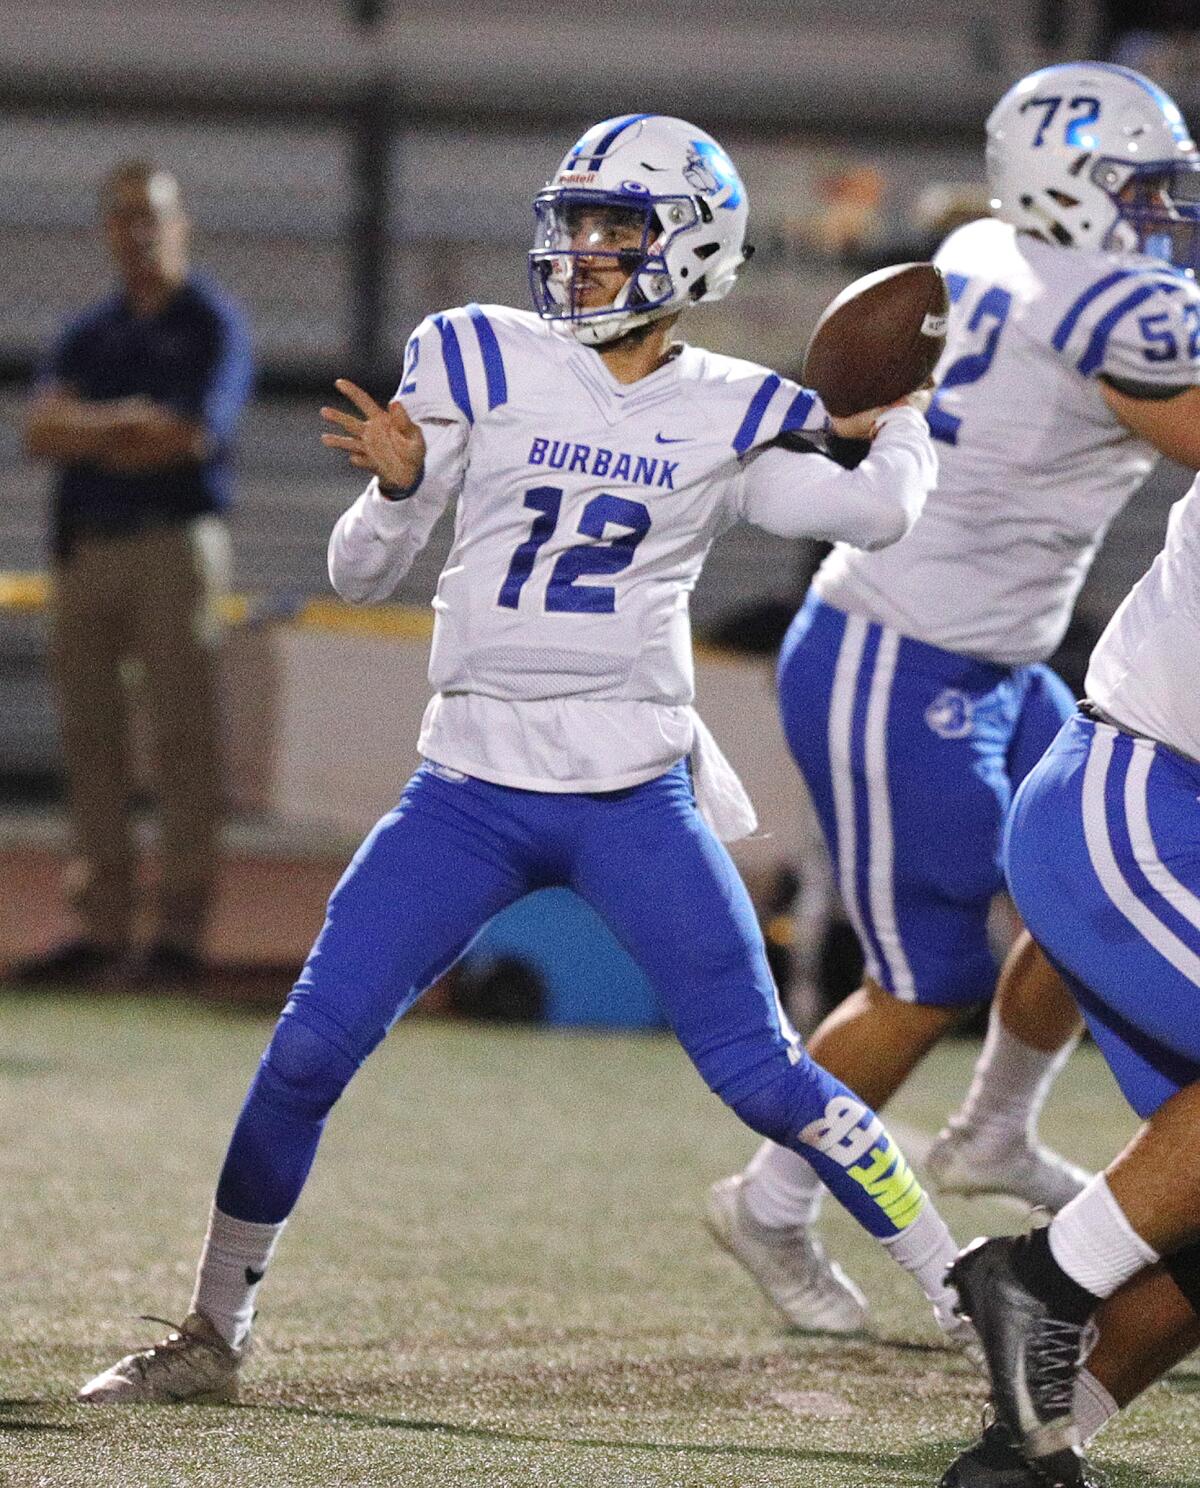 Burbank's quarterback Aram Araradian leans back and throws far downfield against Arcadia in a Pacific League football opener at Arcadia High School on Thursday, September 19, 2019.